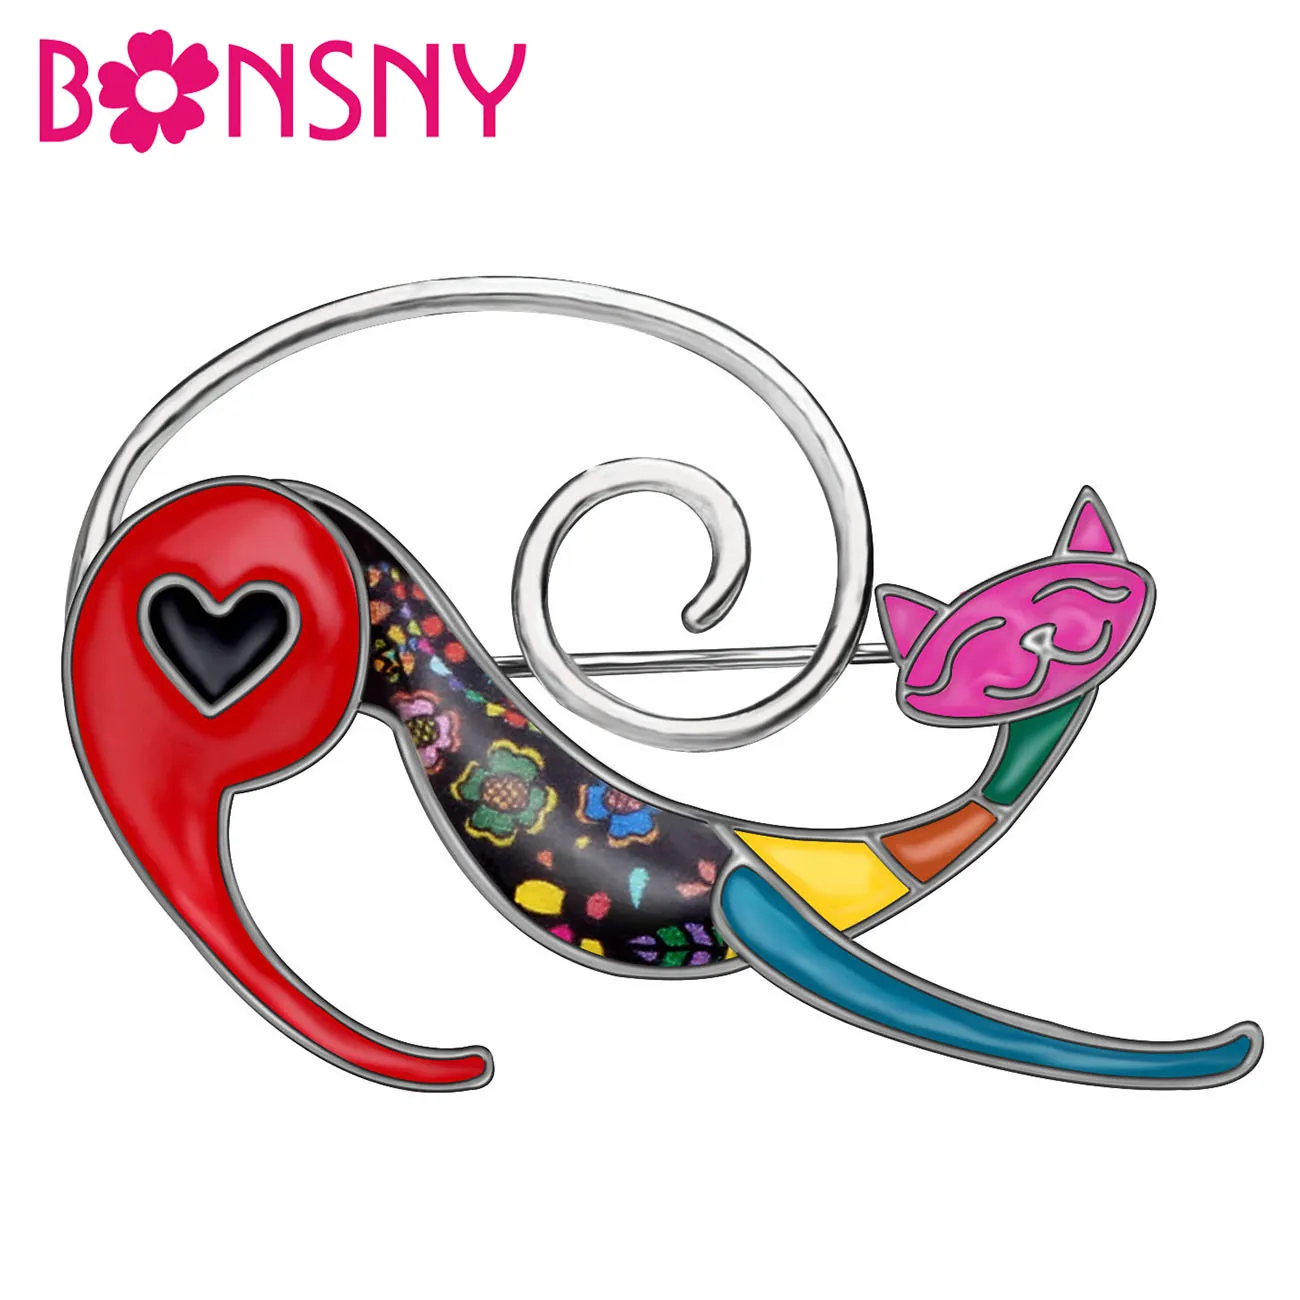 

Bonsny Enamel Alloy Anime Floral Cat Kitten Brooches Clothes Scarf Decoration Pin Animal Jewelry For Women Girls Teens Gift 2019